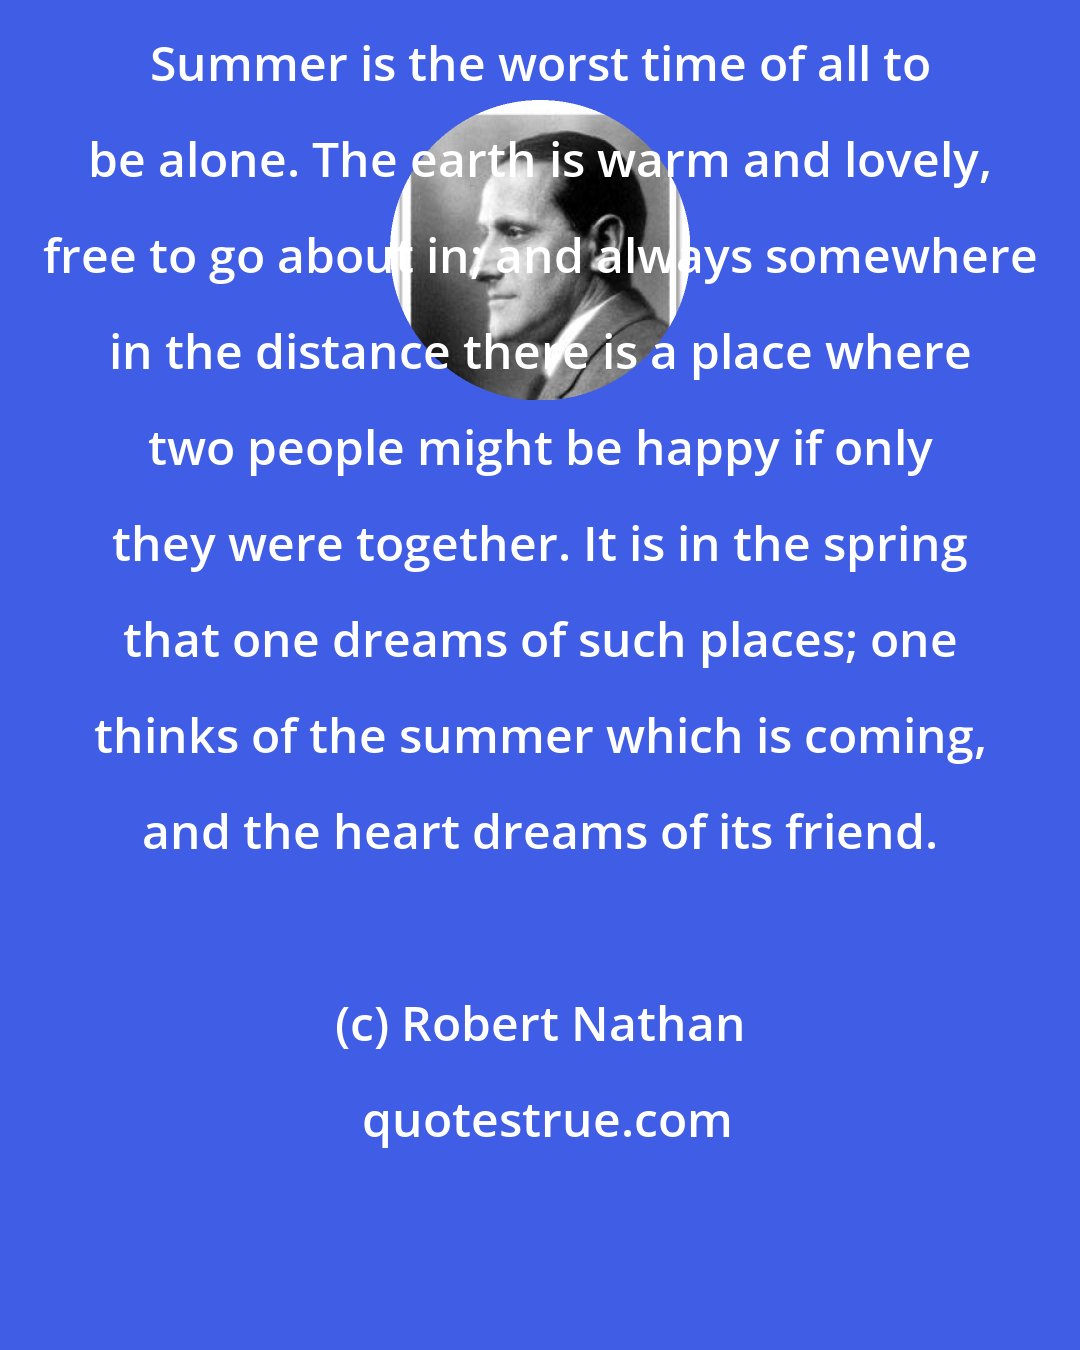 Robert Nathan: Summer is the worst time of all to be alone. The earth is warm and lovely, free to go about in; and always somewhere in the distance there is a place where two people might be happy if only they were together. It is in the spring that one dreams of such places; one thinks of the summer which is coming, and the heart dreams of its friend.